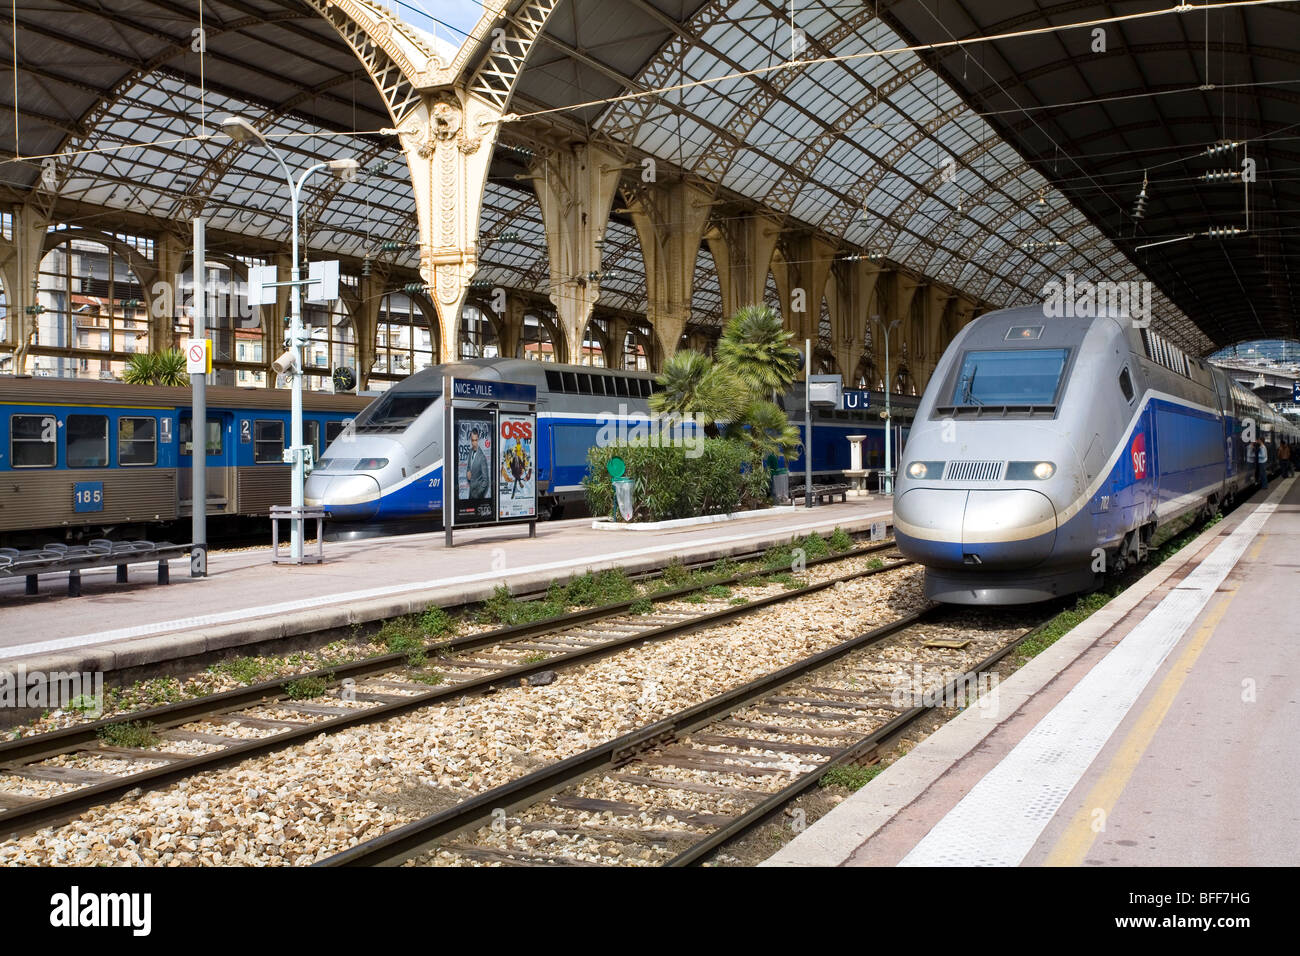 TGV high speed railroad trains at the Nice-Ville station in the town of Nice, Cote d'Azur, France Stock Photo